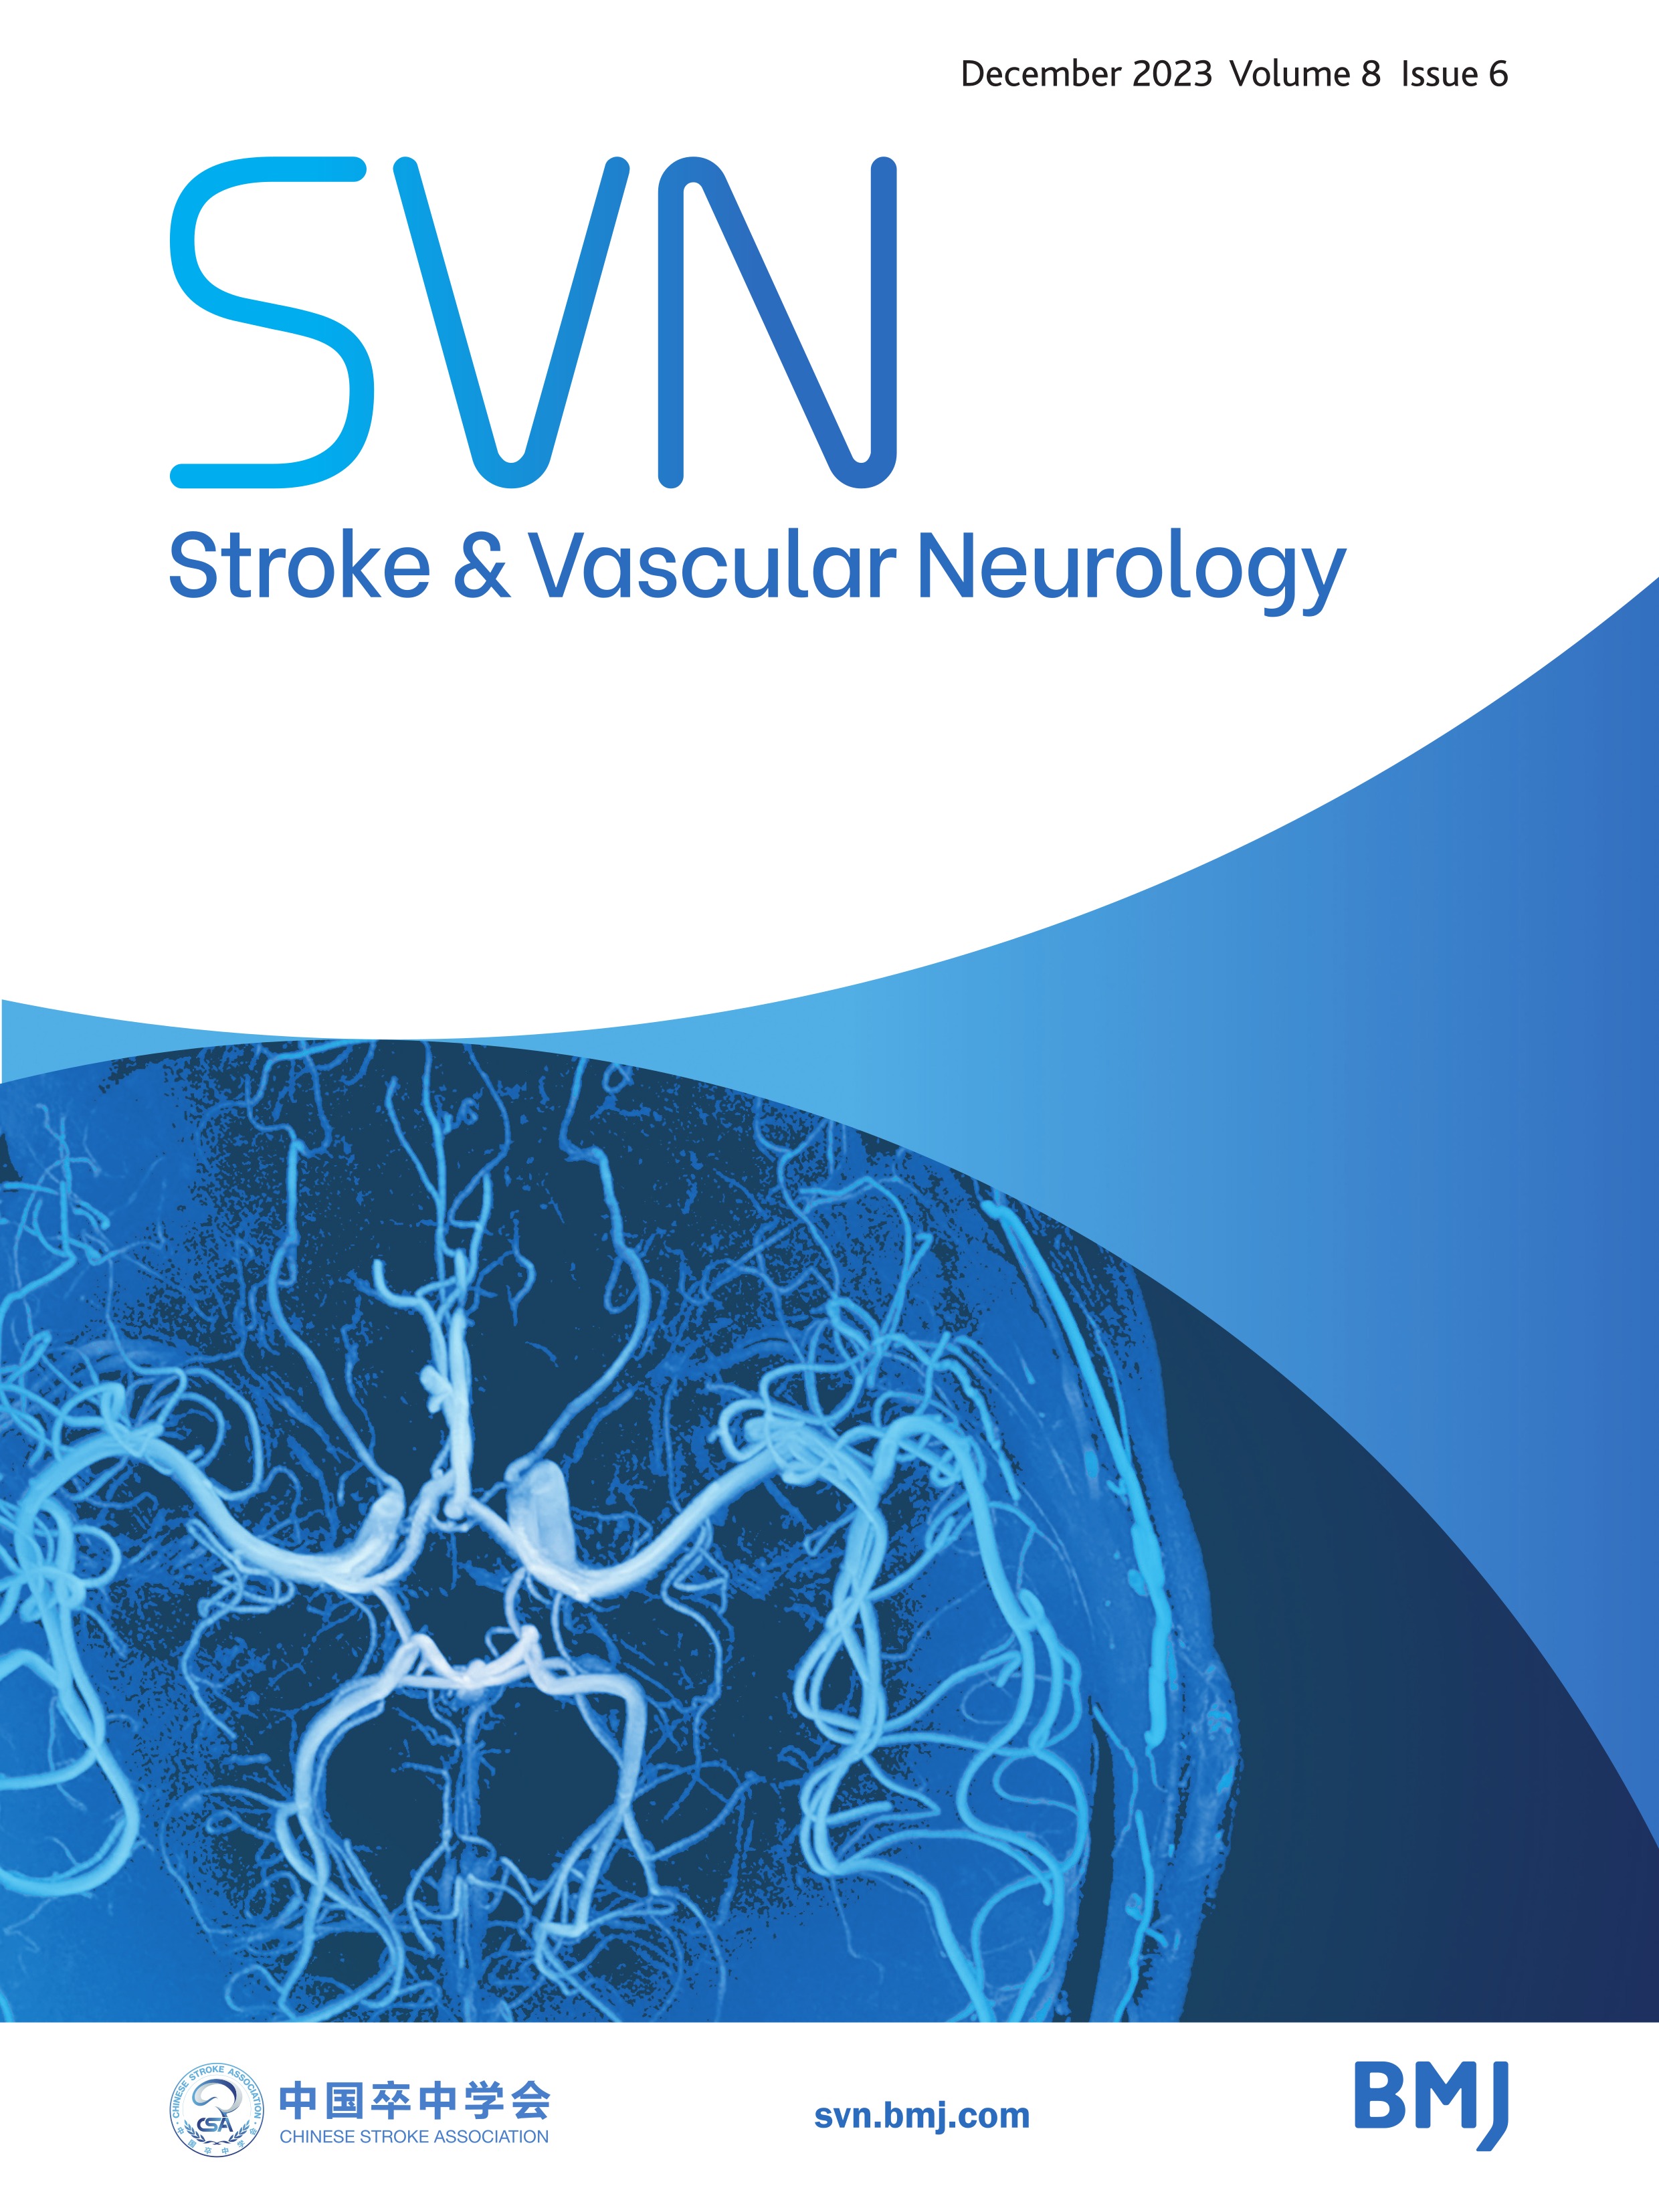 Prestroke physical activity is associated with admission haematoma volume and the clinical outcome of intracerebral haemorrhage